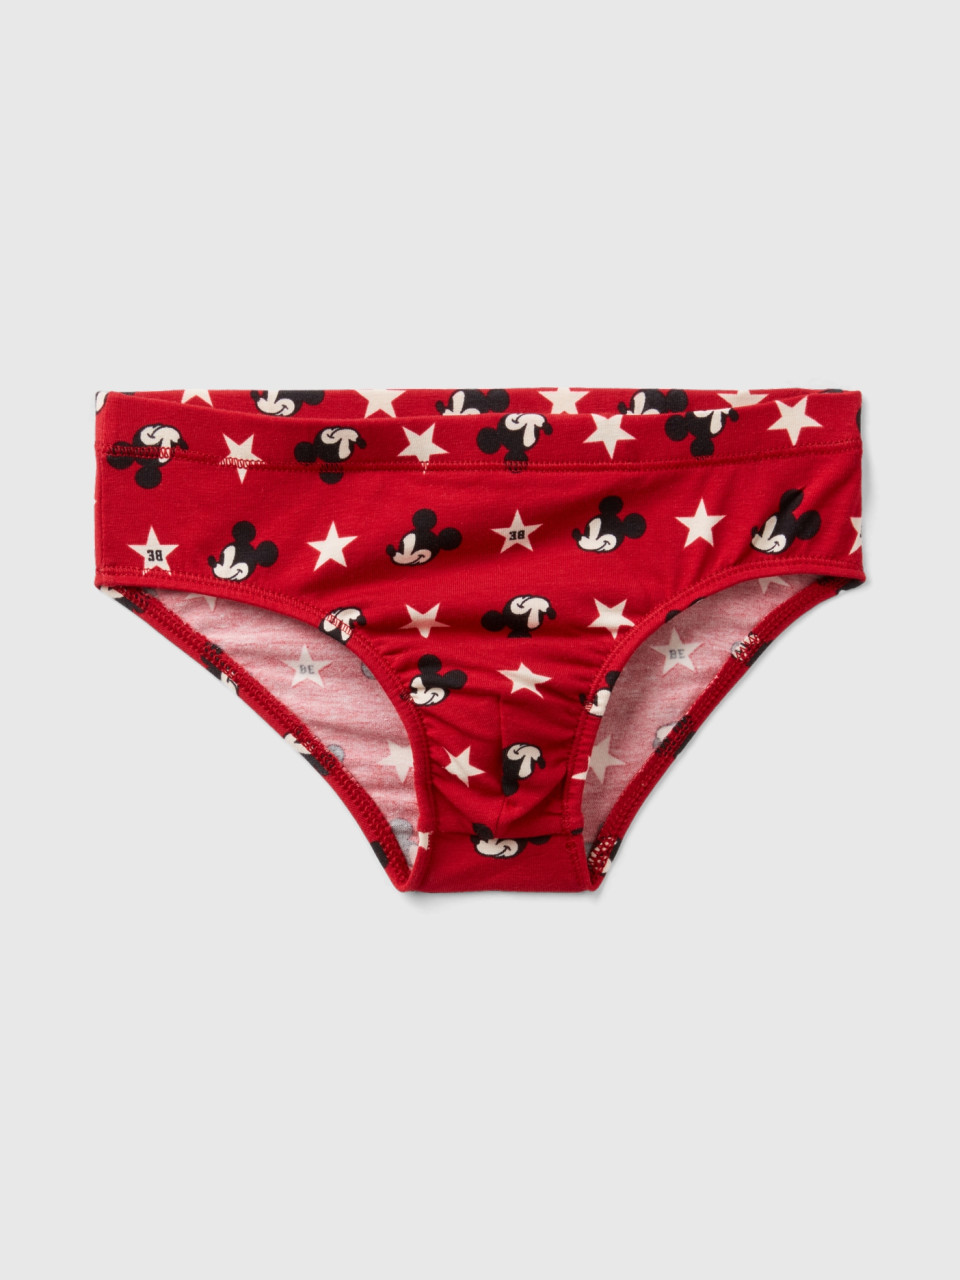 Benetton, Red Mickey Mouse Briefs, Red, Kids